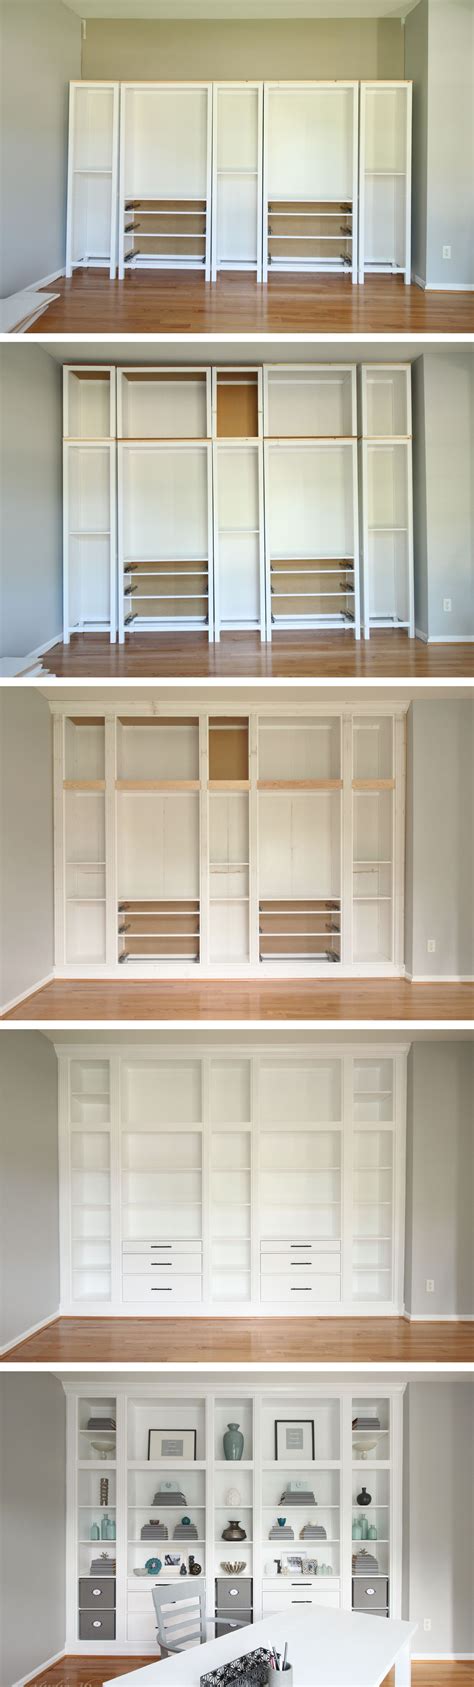 Diy Built In Bookcases Made With Ikea Hemnes Furniture Custom Built In